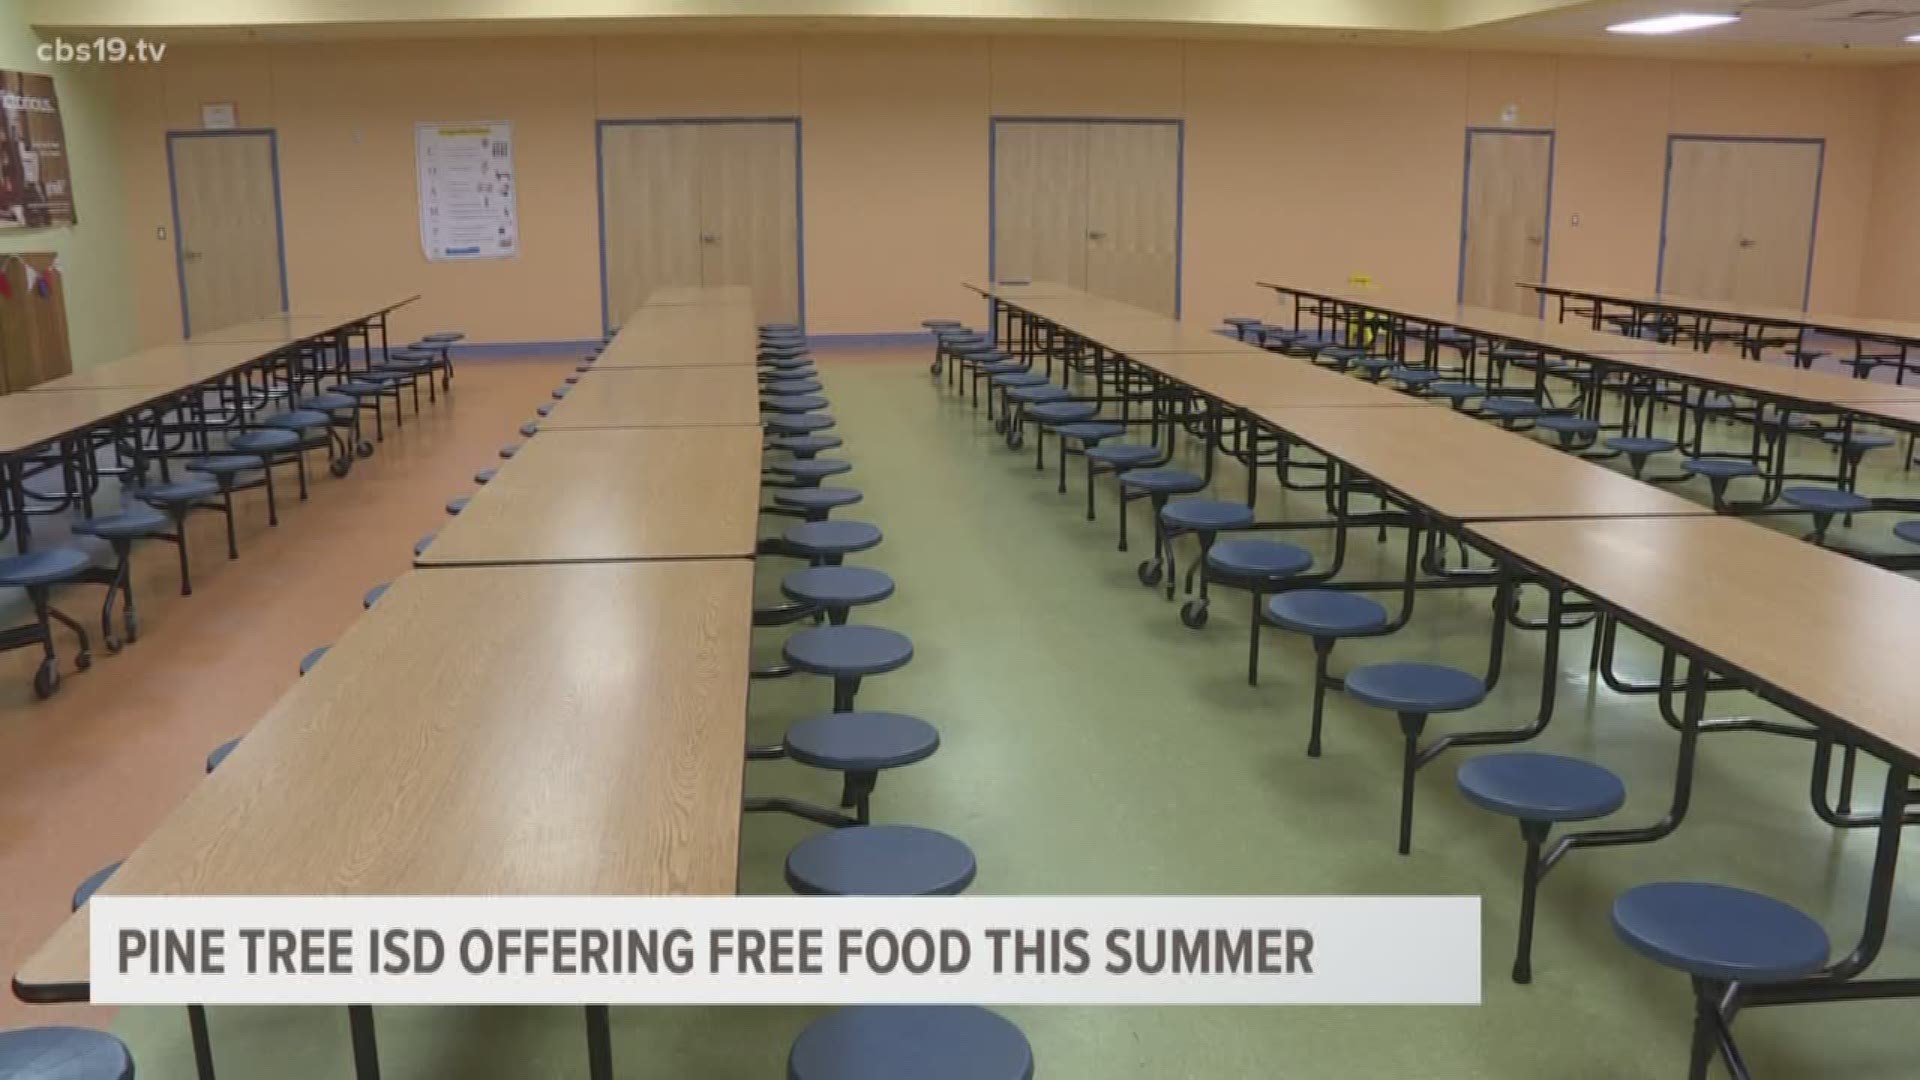 Summer Break is approaching and so is Pine Tree ISD's Summer Food Program, which provides free breakfast and lunch to any child ages one to 18.